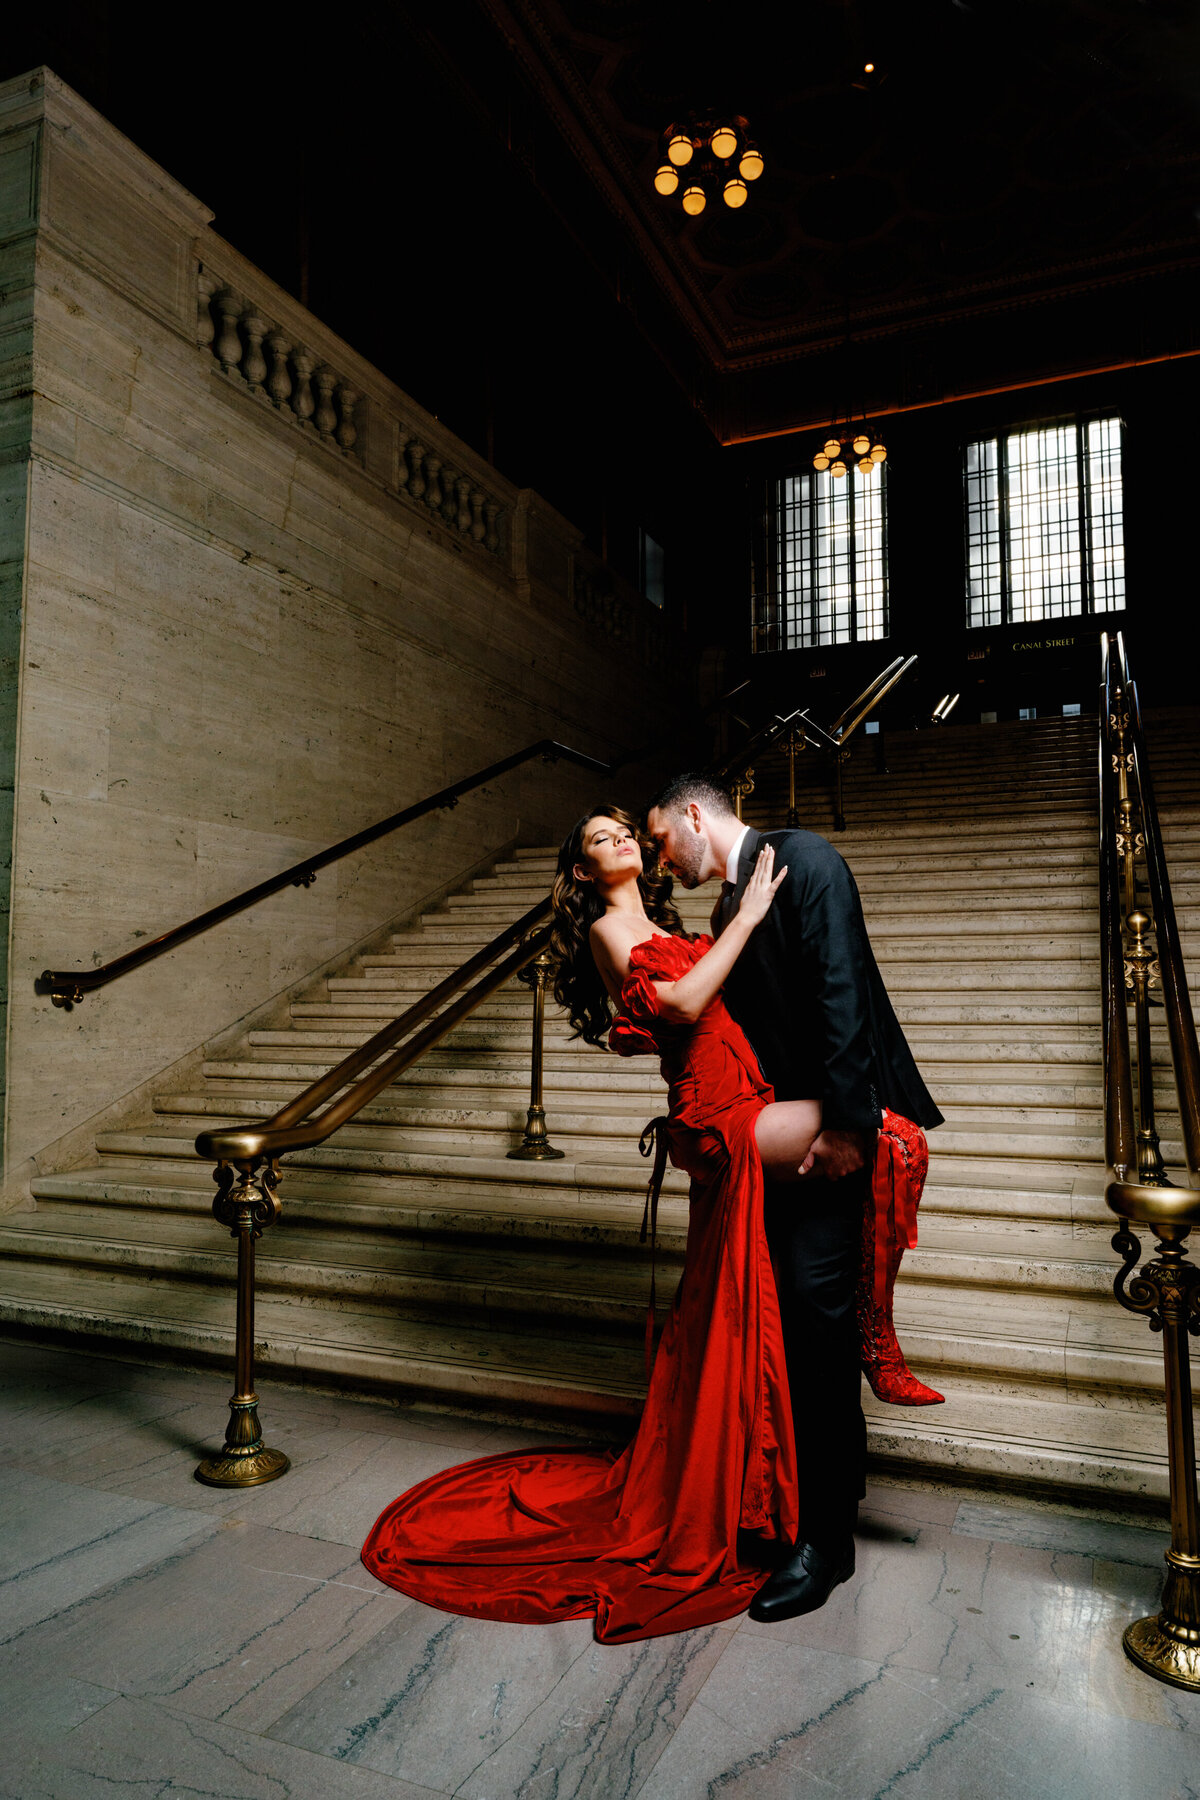 Aspen-Avenue-Chicago-Wedding-Photographer-Union-Station-Chicago-Theater-Engagement-Session-Timeless-Romantic-Red-Dress-Editorial-Stemming-From-Love-Bry-Jean-Artistry-The-Bridal-Collective-True-to-color-Luxury-FAV-29